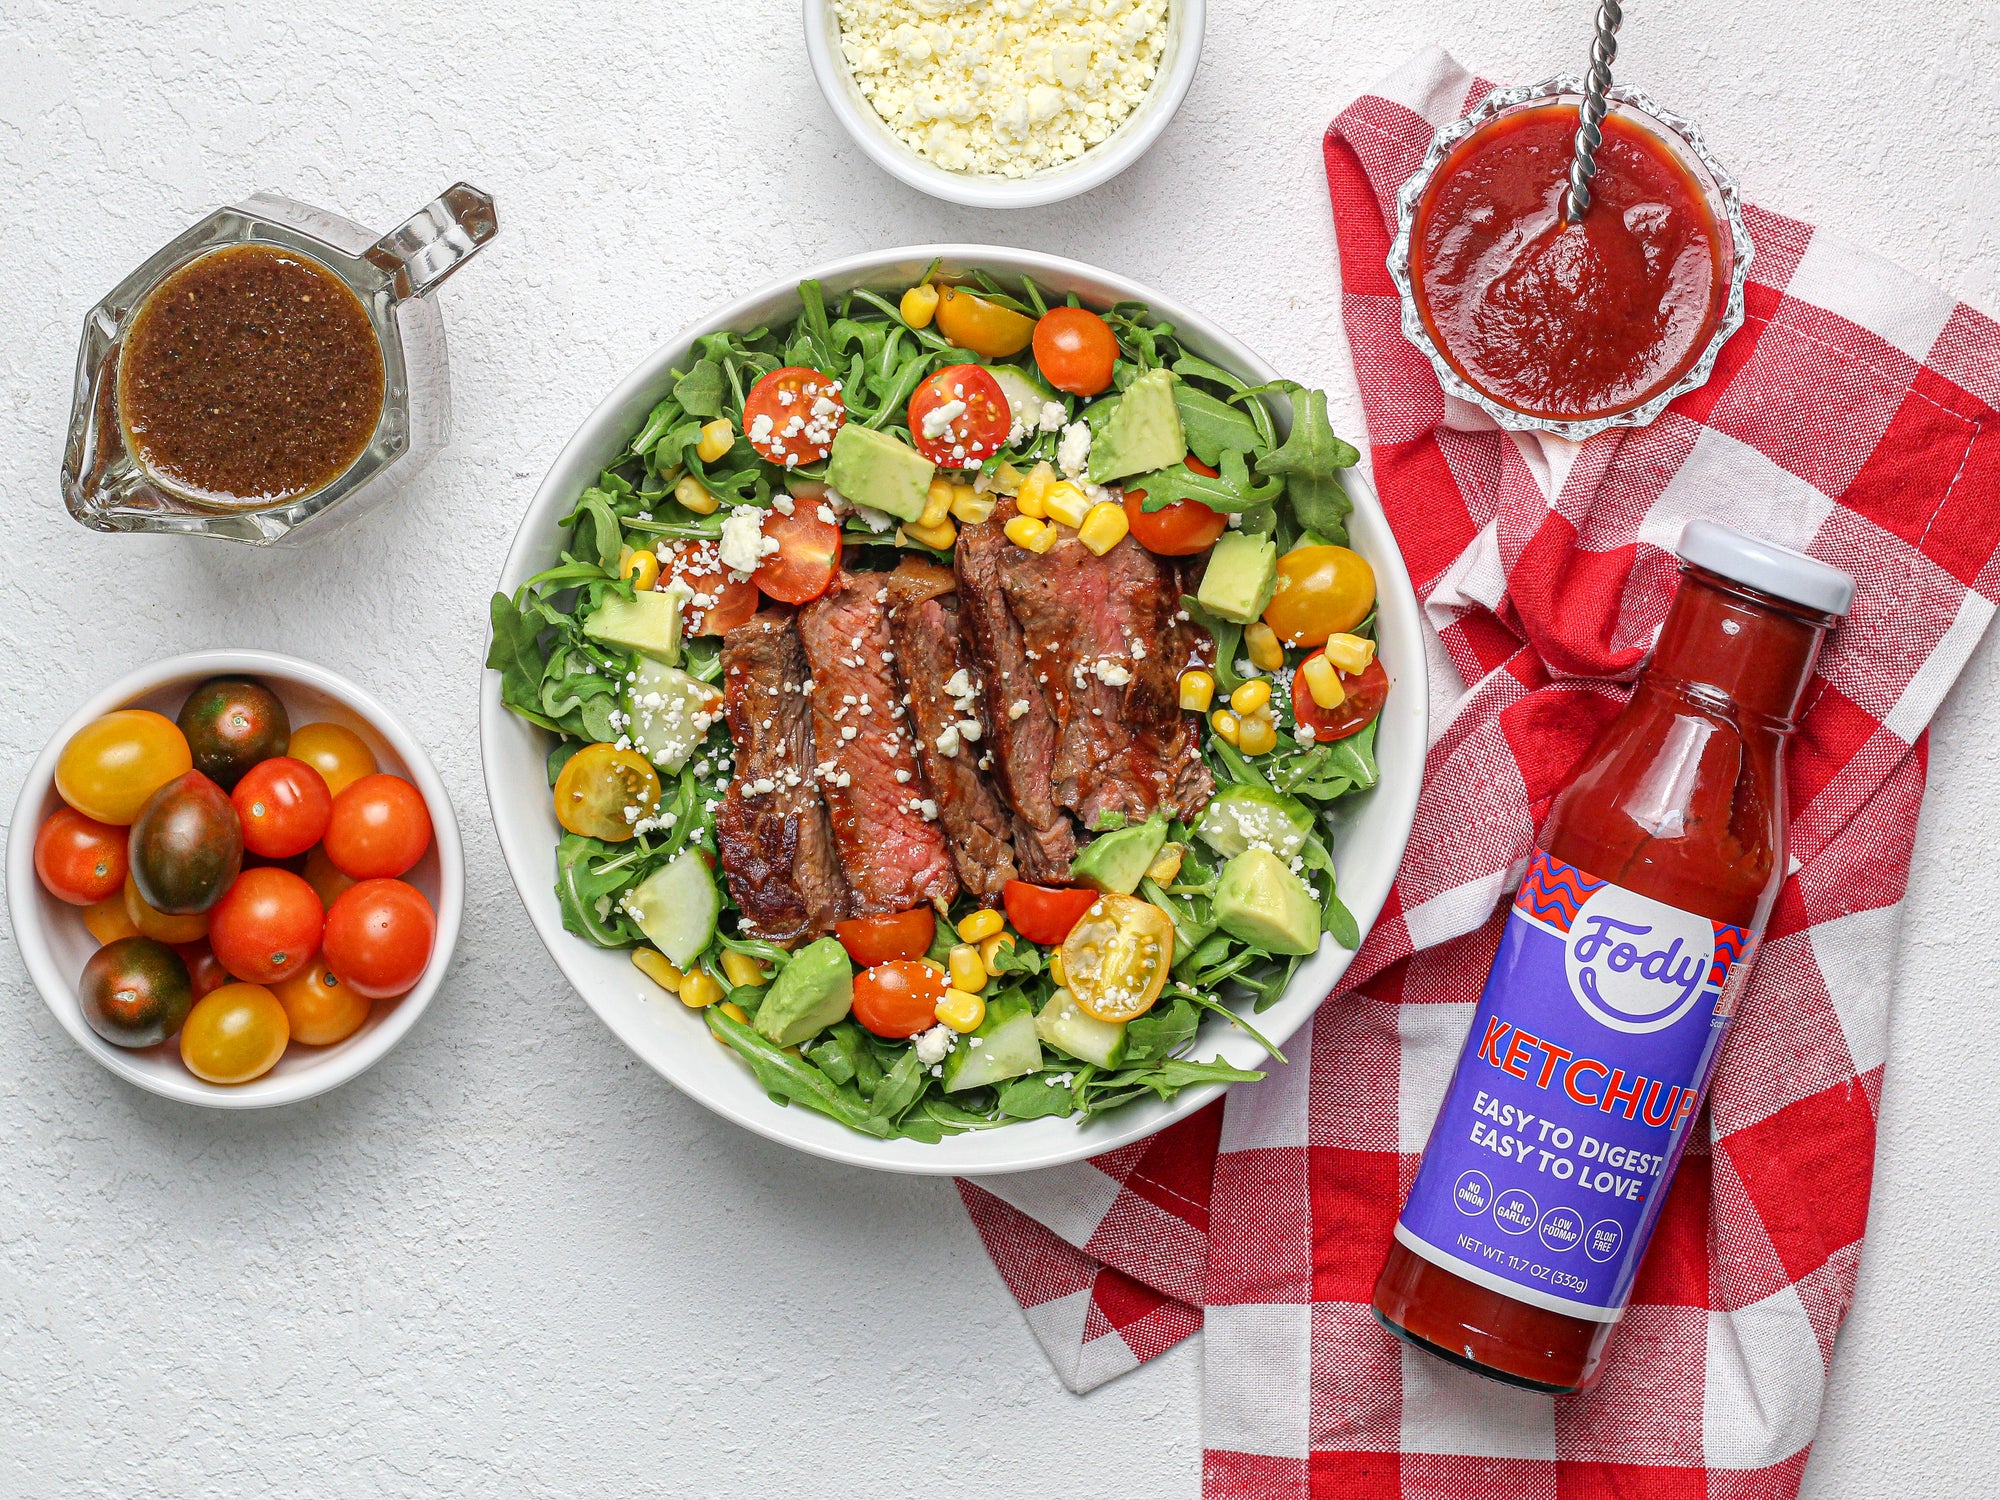 Fody’s Low FODMAP Grilled Steak Salad with Grilled Corn & Avocado